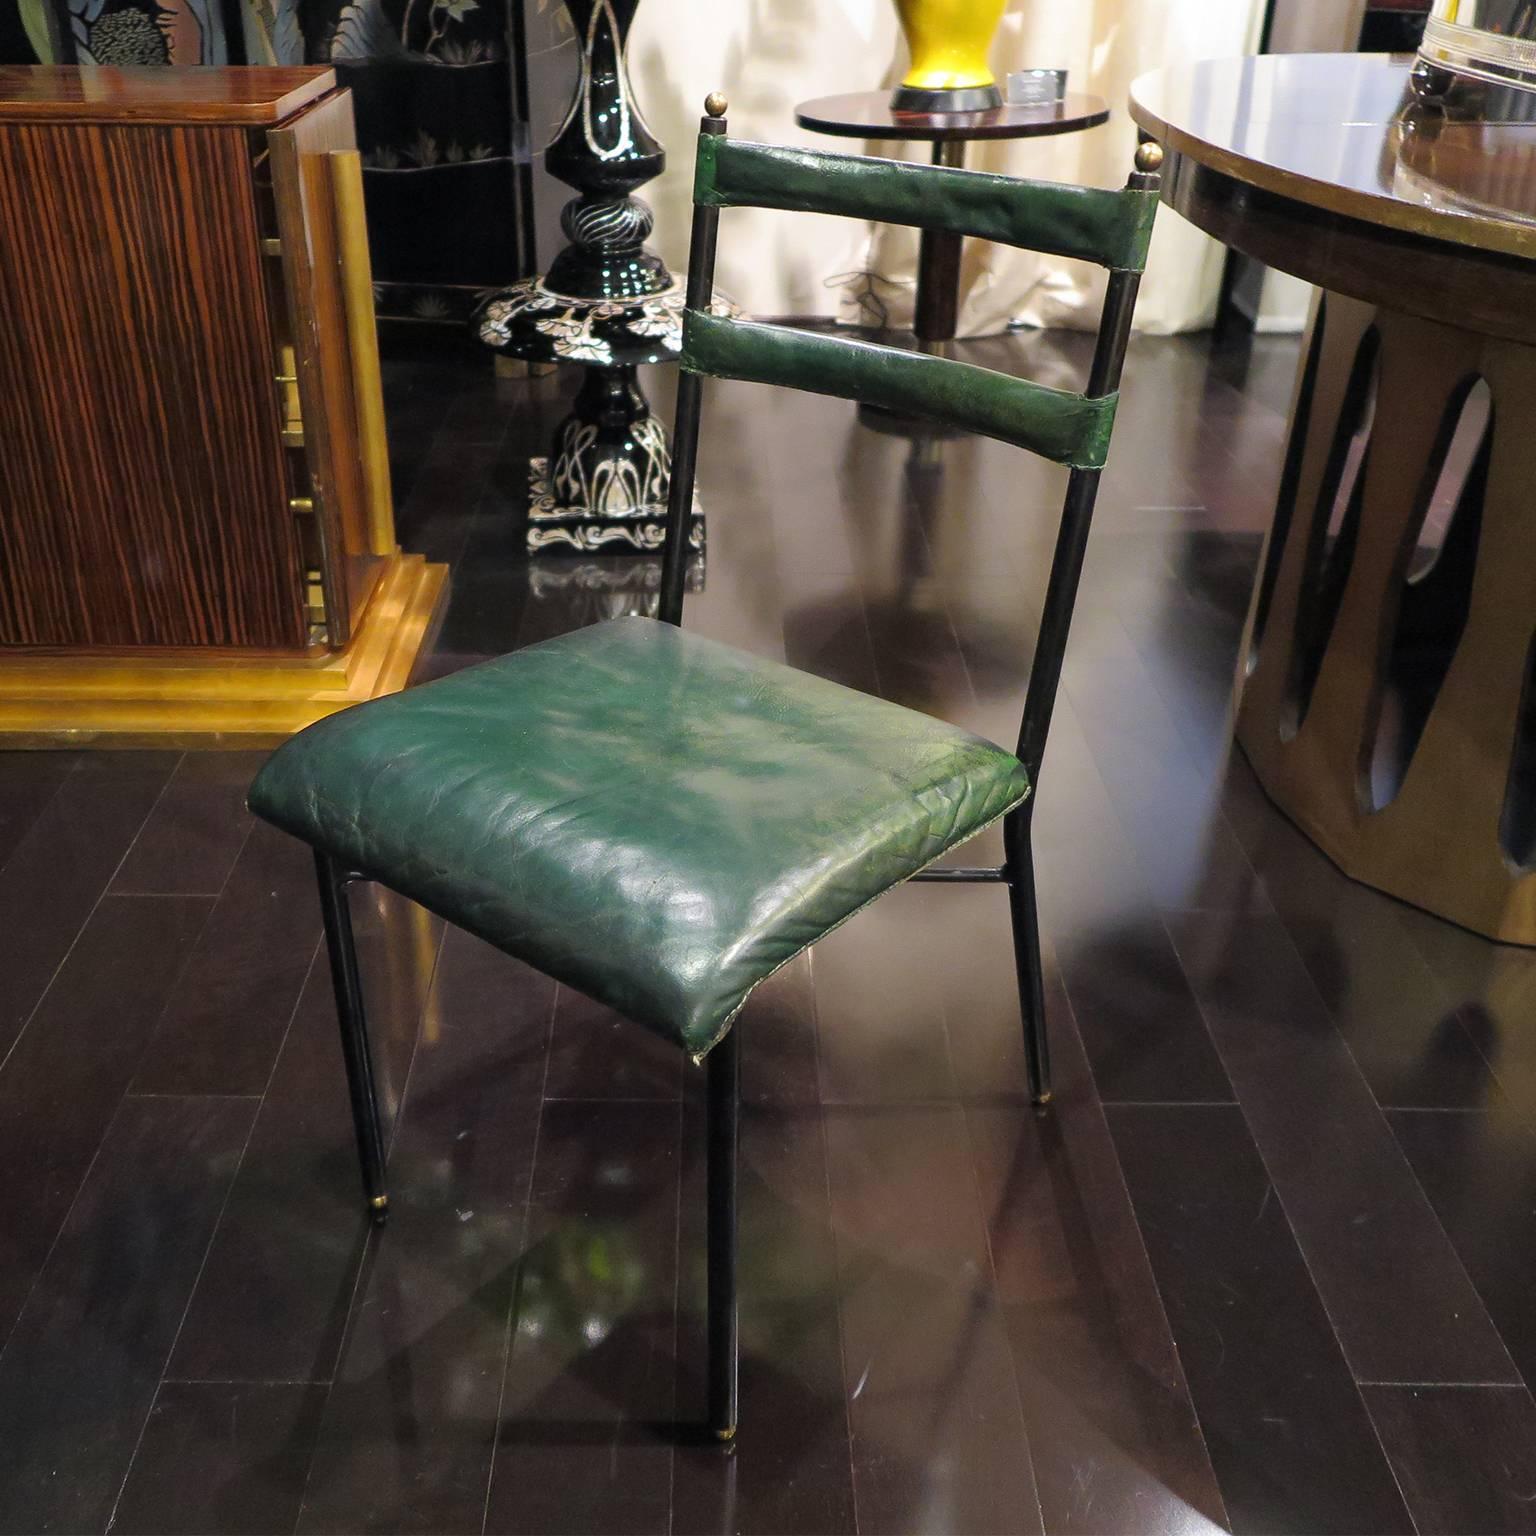 Pair of chairs by Jacques Adnet in original green leather. Iron frame with brass details. Original condition.